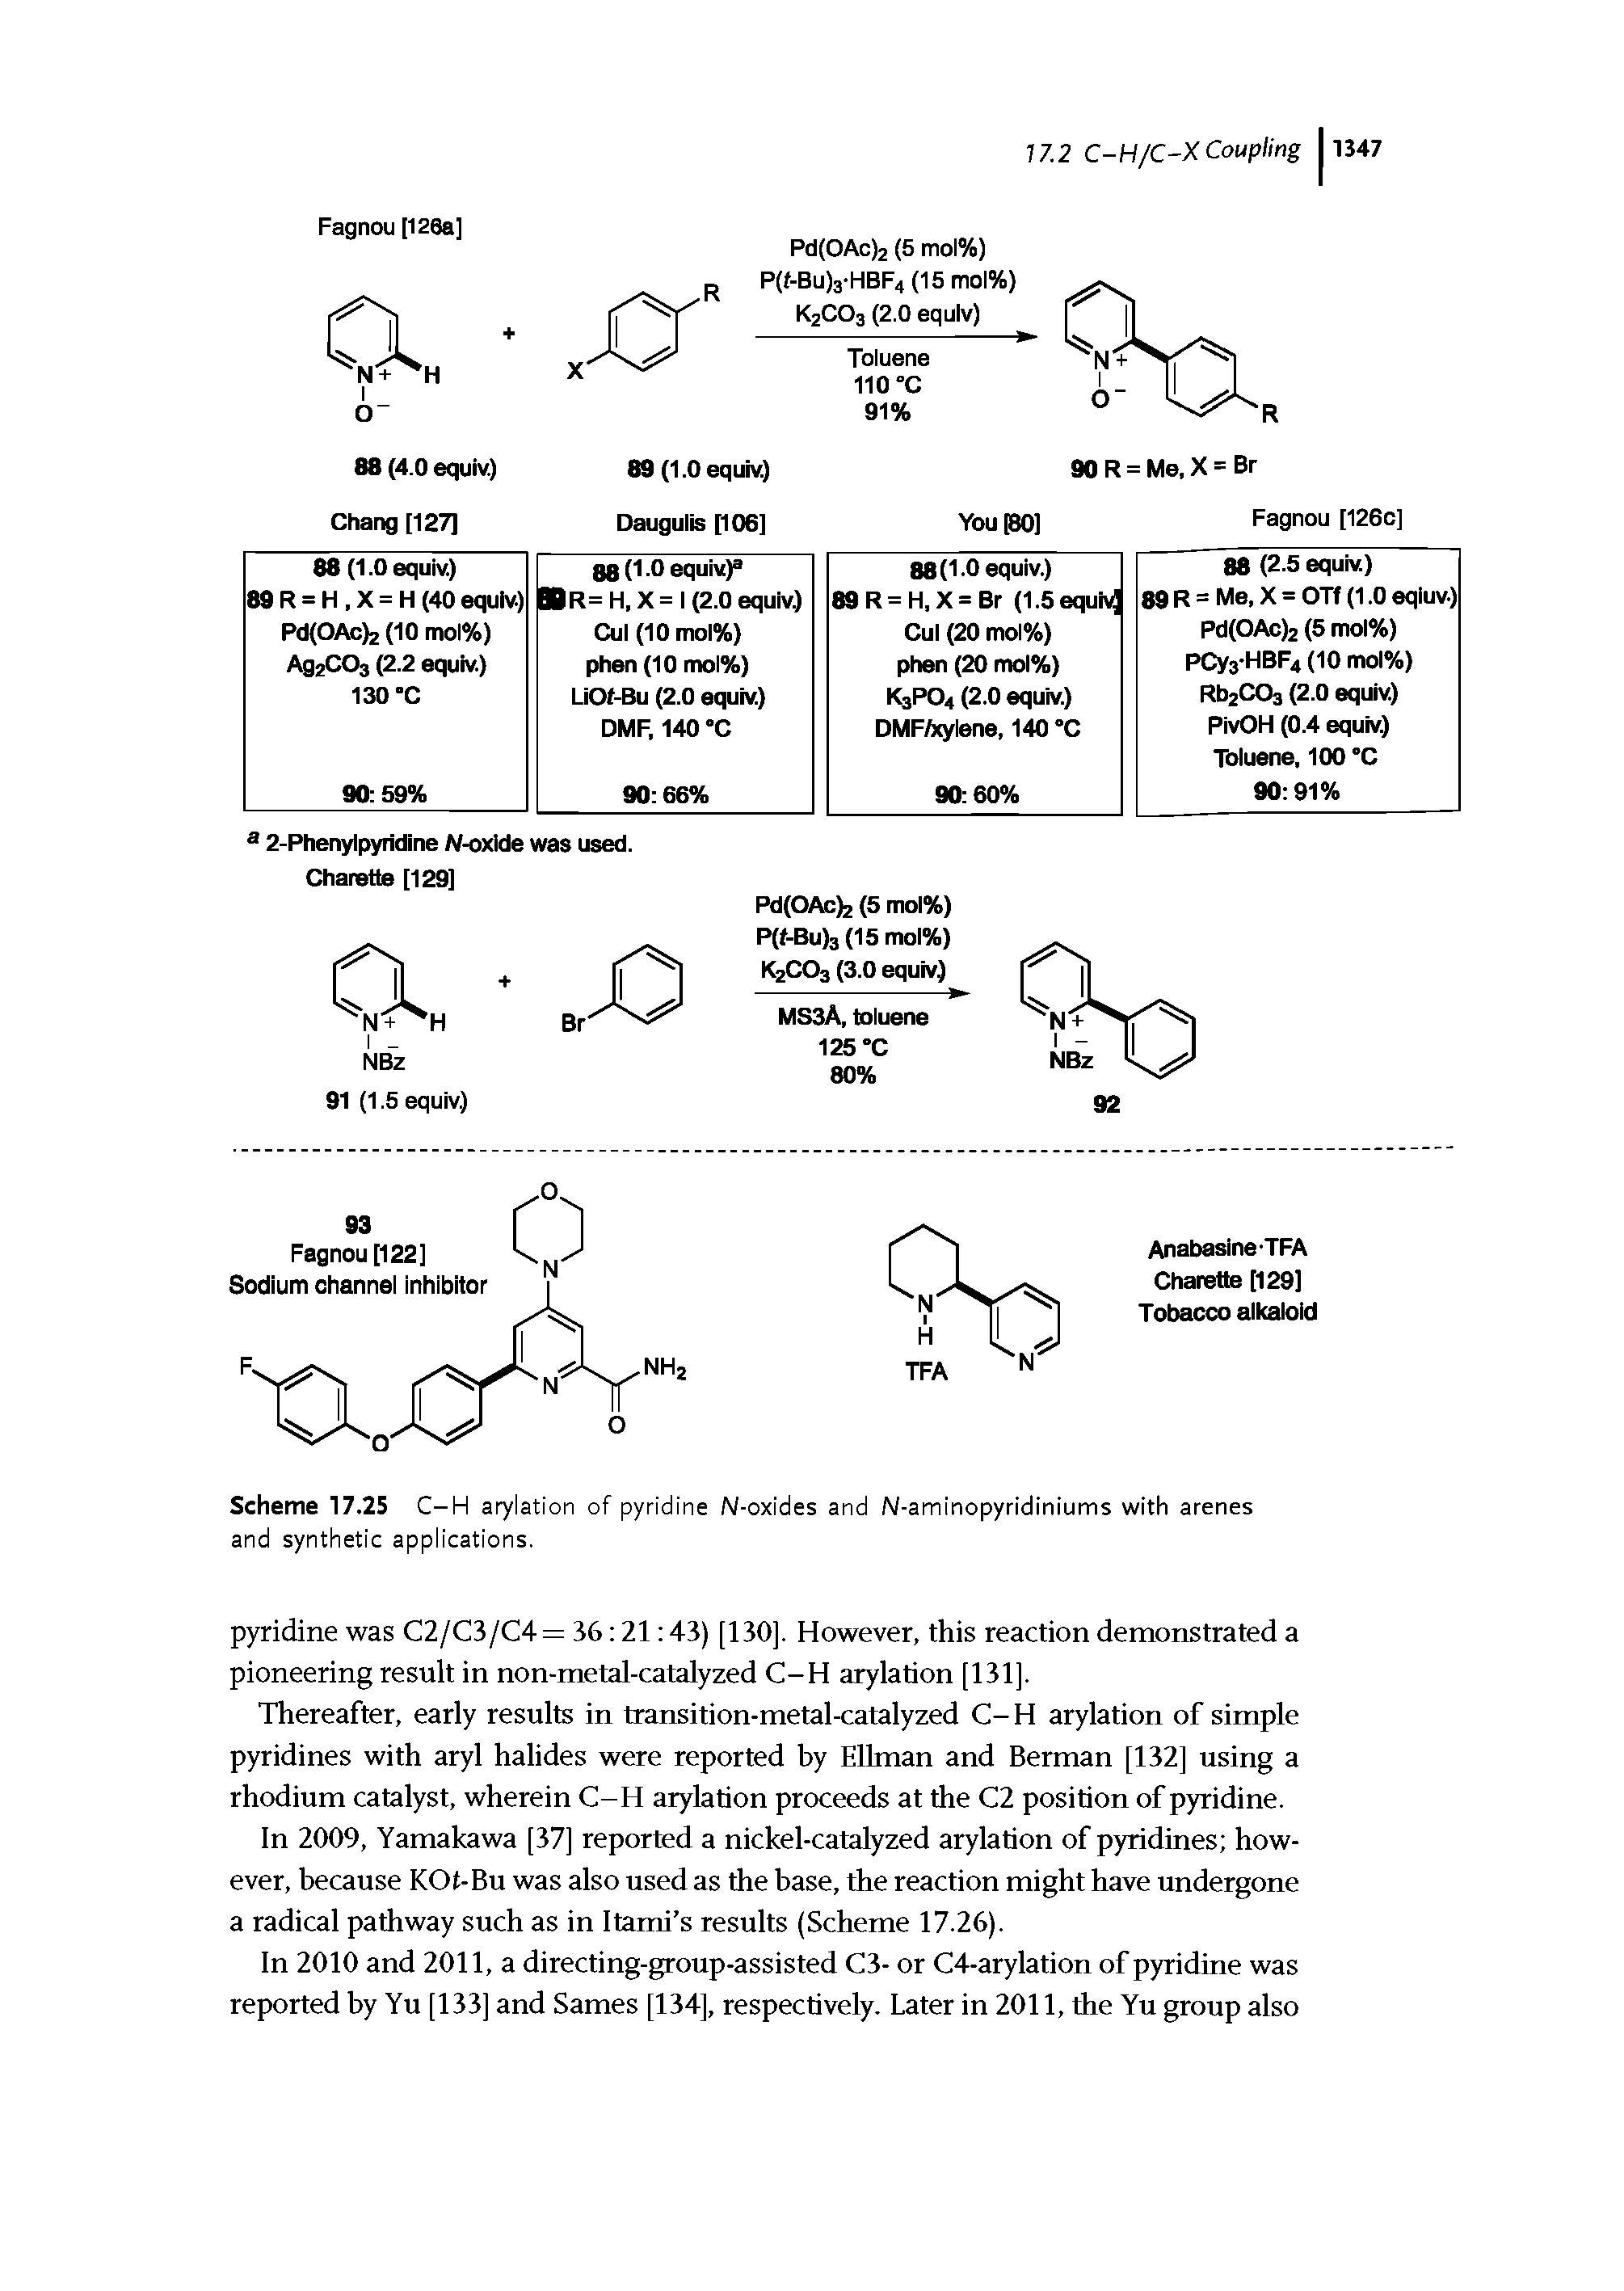 Scheme 17.25 C-H a7lation of pyridine N-oxides and N-aminopyridiniums with arenes and synthetic applications.